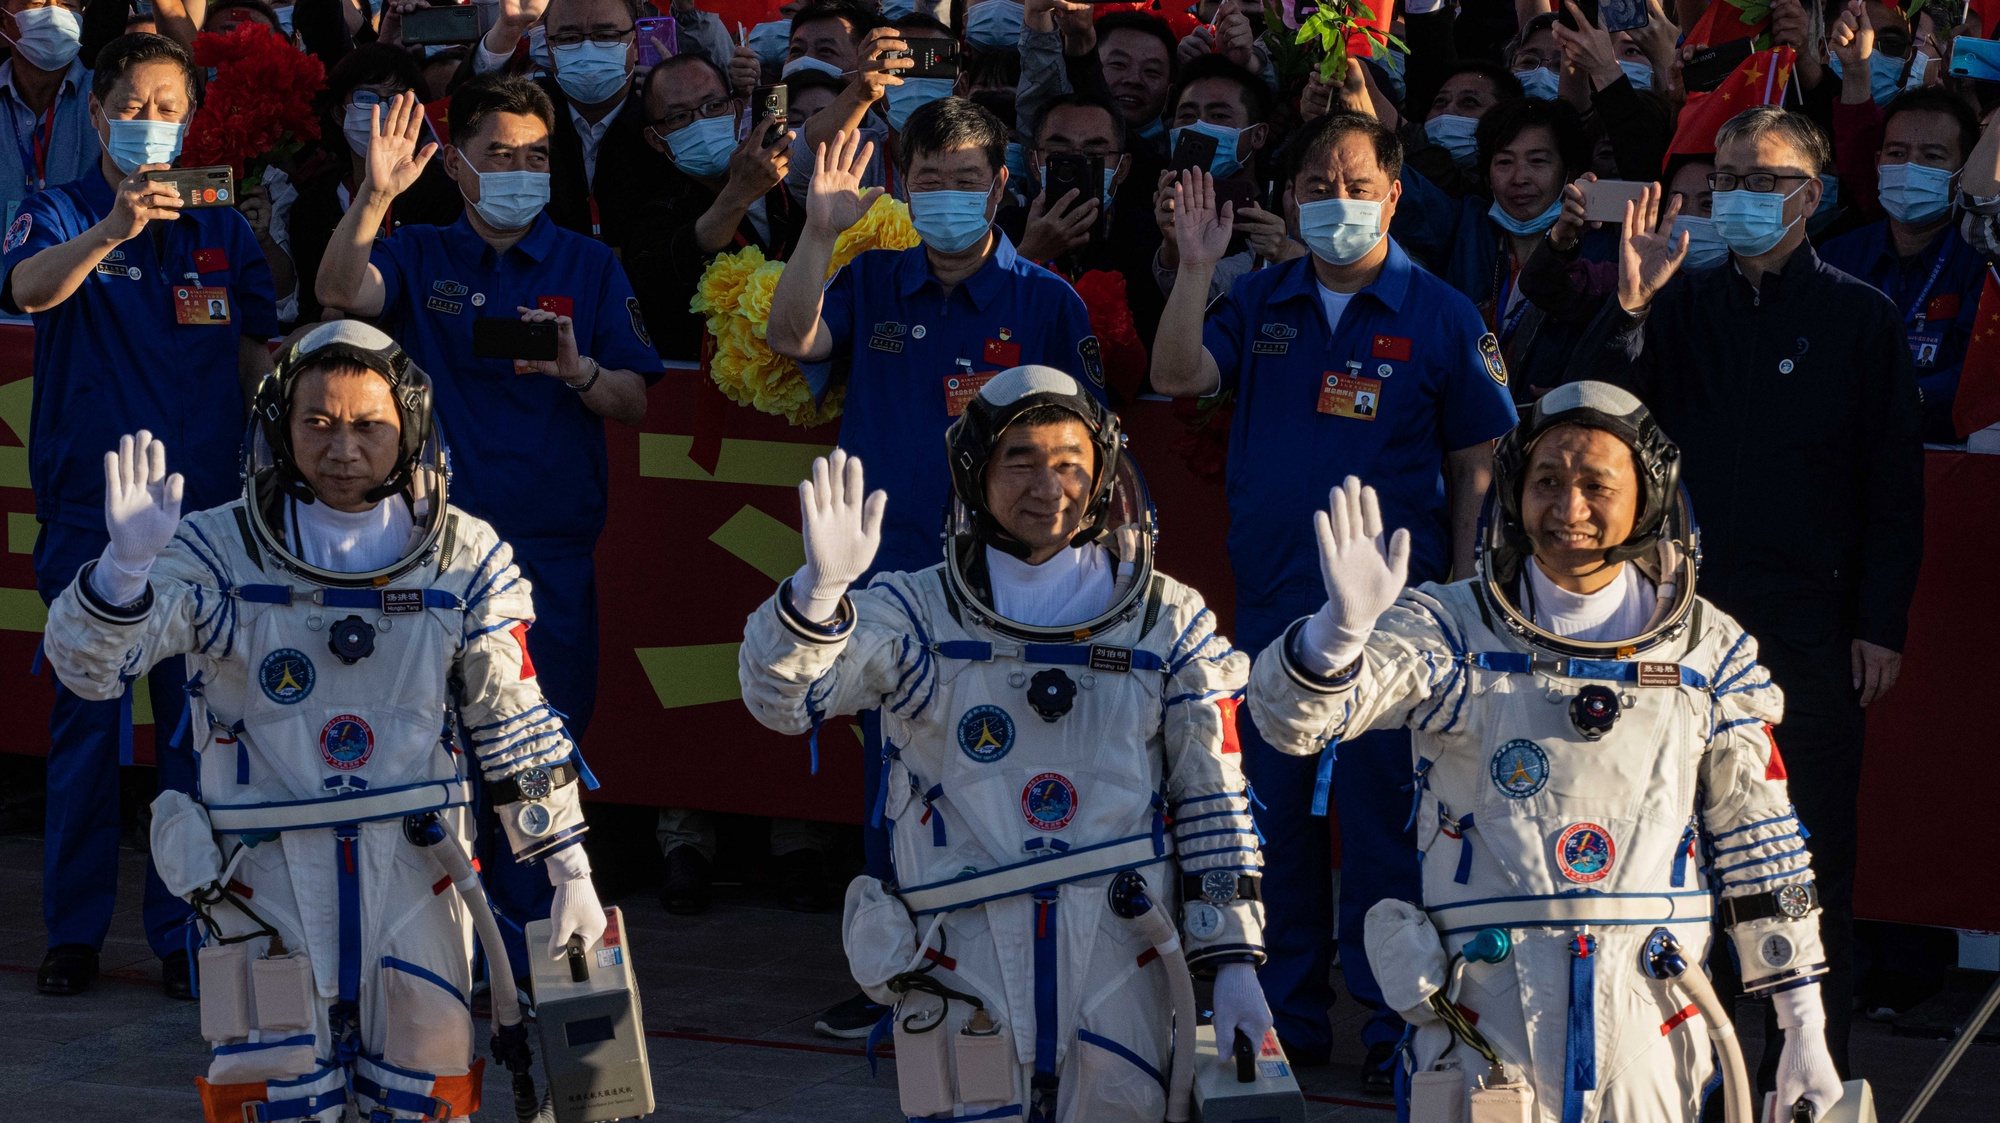 epa09278427 Chinese astronauts Tang Hongbo, Nie Haisheng, and Liu Boming wave during a departure ceremony before the launch of the Long March-2F carrier rocket, carrying the Shenzhou-12 at the Jiuquan Satellite Launch Center, in the Gobi Desert, northwest of China, 17 June 2021. China launches Shenzhou-12 spacecraft carrying three crew members Tang Hongbo, Nie Haisheng, and Liu Boming to the orbiting Tianhe core module for a three-month mission on 17 June. It is the first spaceflight in almost five years where China sends humans into space.  EPA/ROMAN PILIPEY